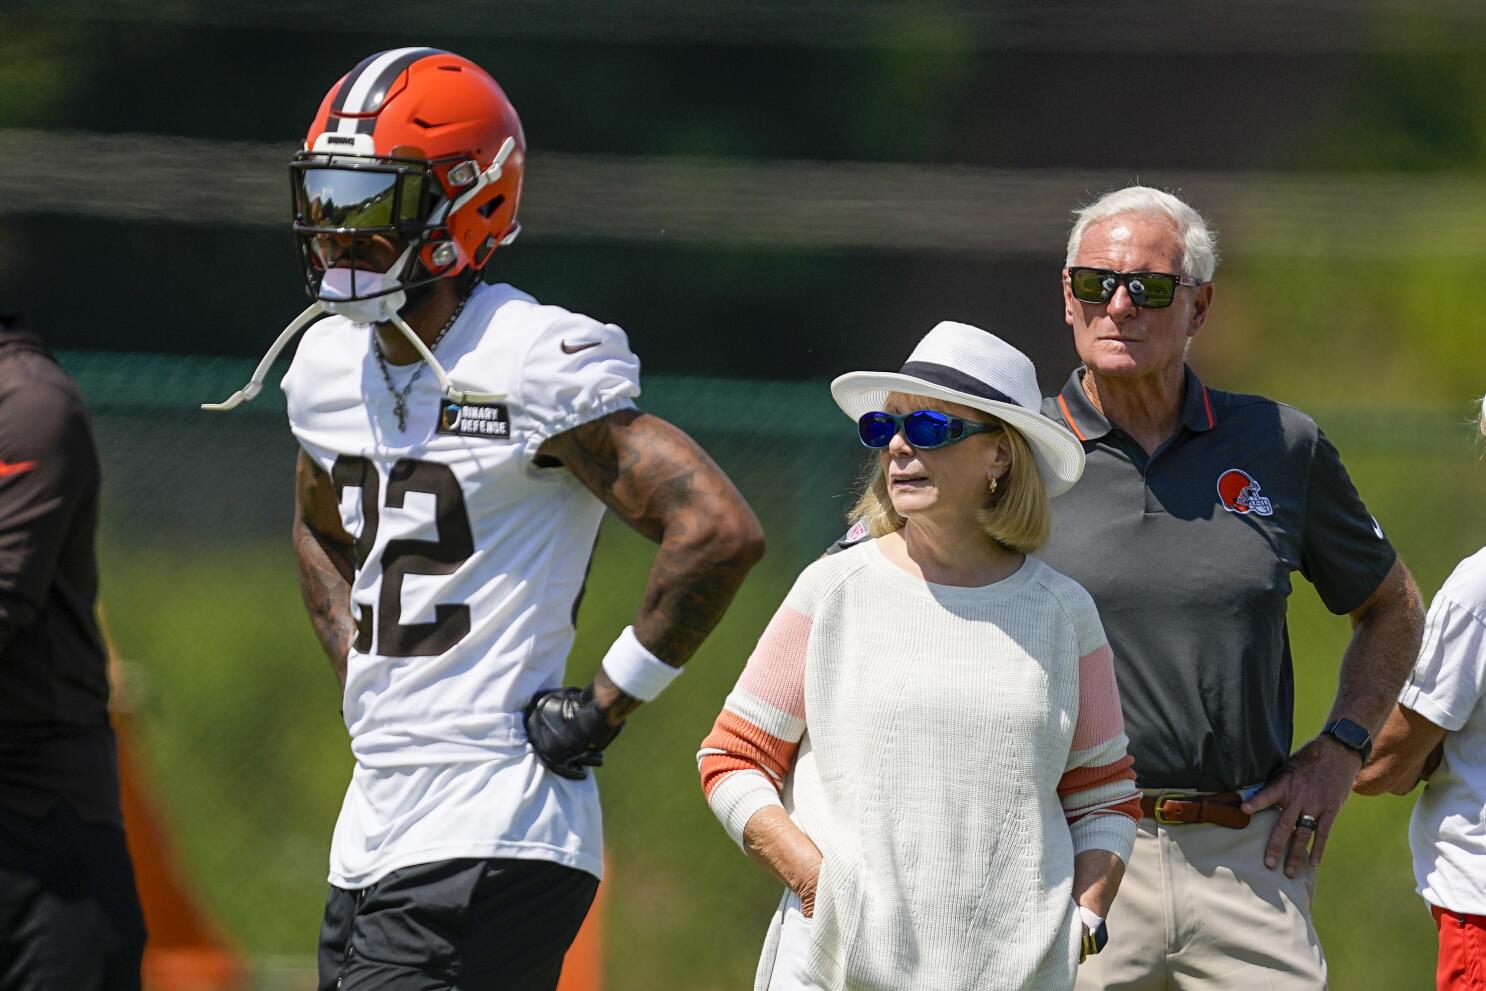 Browns owners Dee and Jimmy Haslam optimistic about season, but